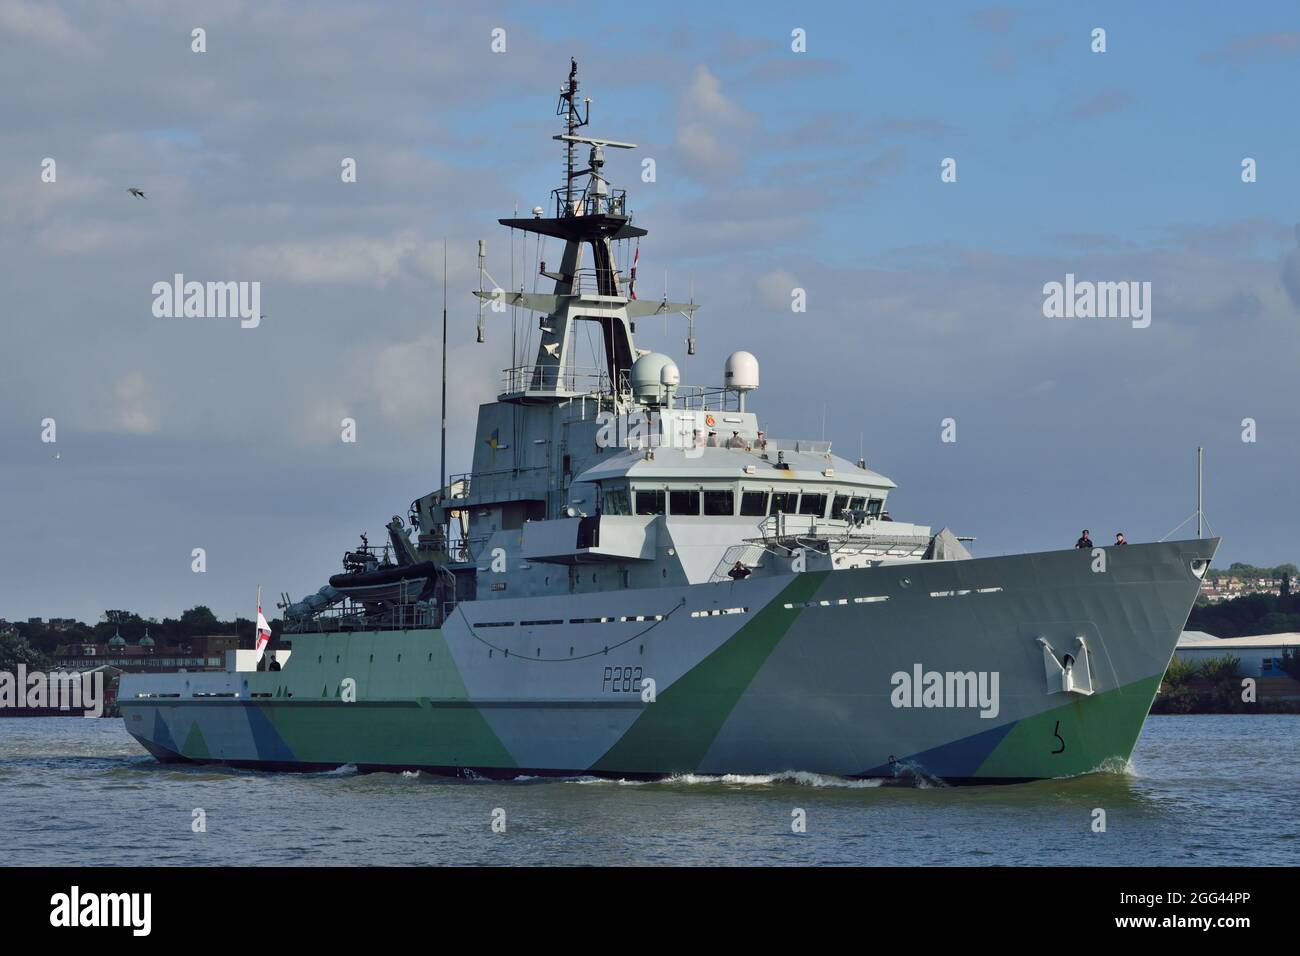 Royal Navy Offshore Patrol Vessel HMS Severn heading up the River Thames to London Stock Photo